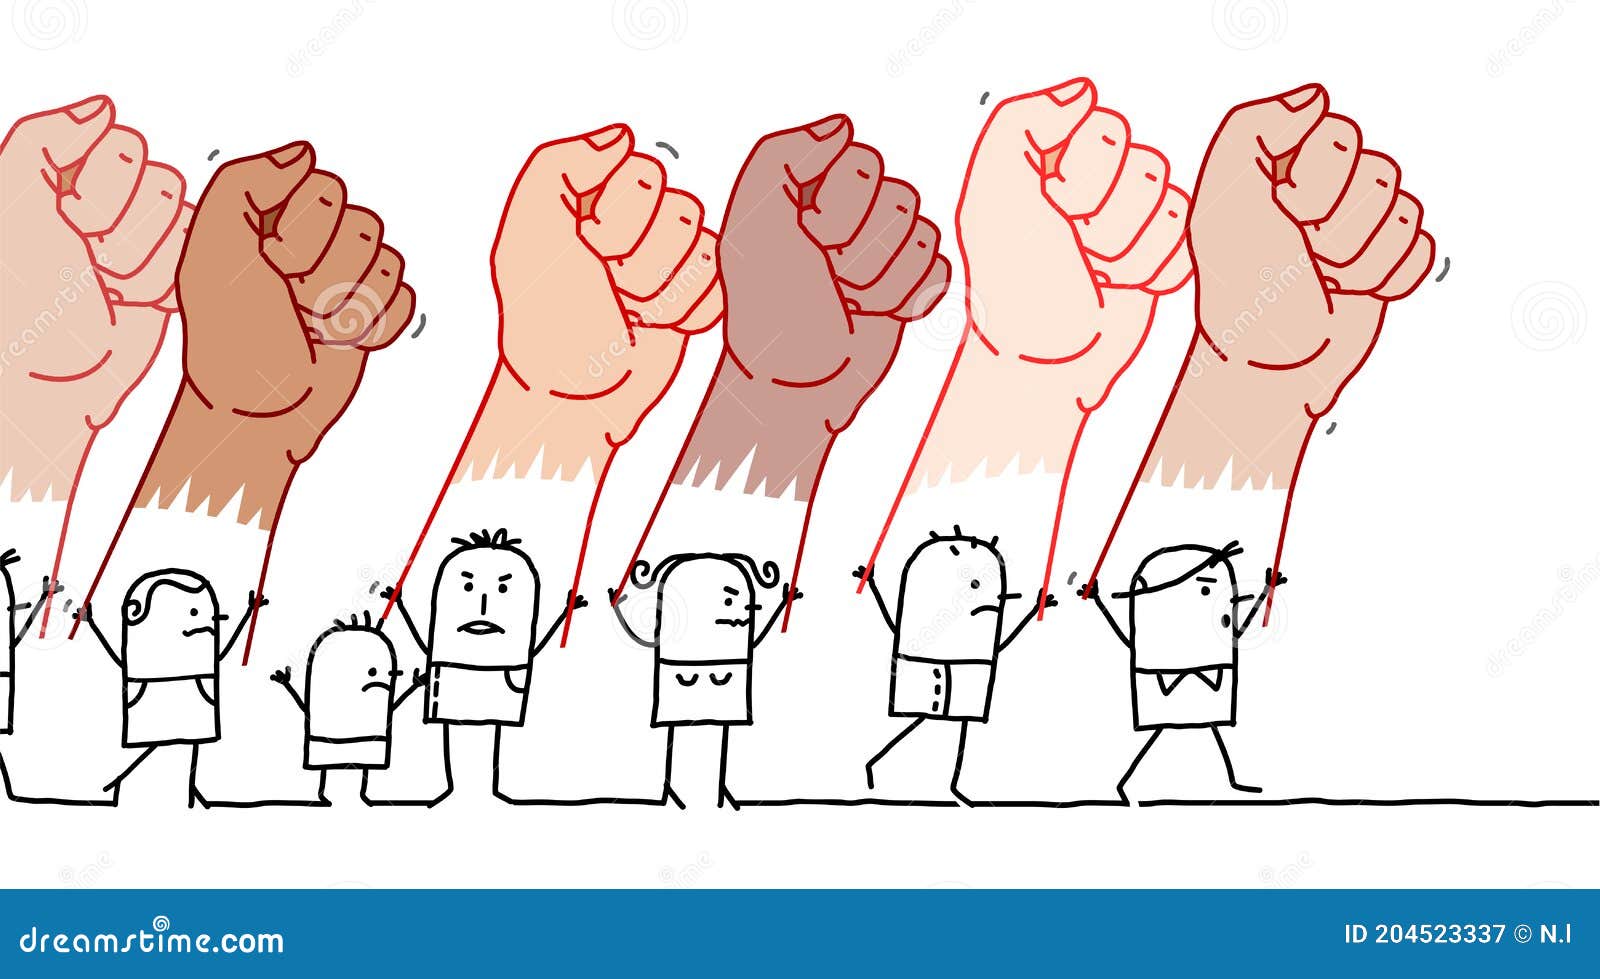 cartoon protesting people with big multi-ethnical raised fists